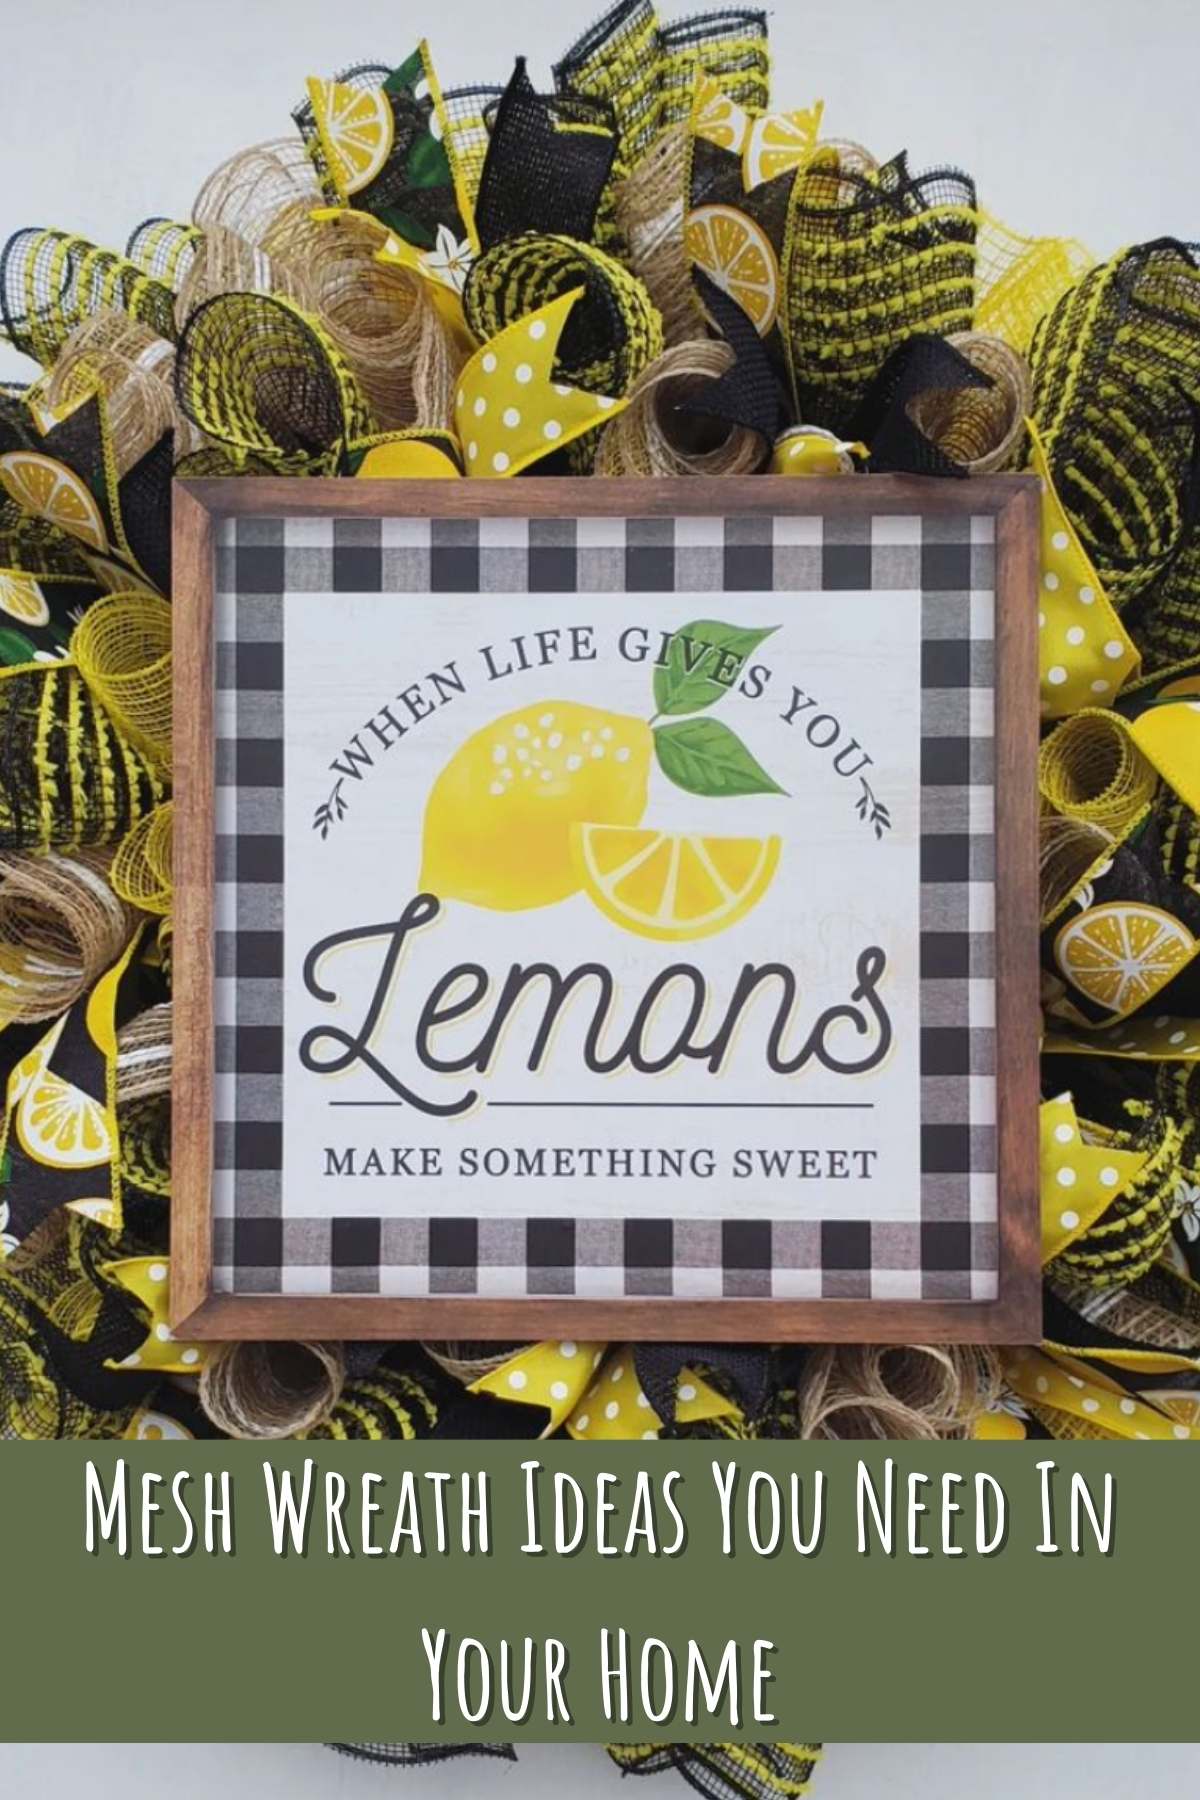 Mesh Wreath ideas Your Need In Your Home. Photo of lemon wreath idea.